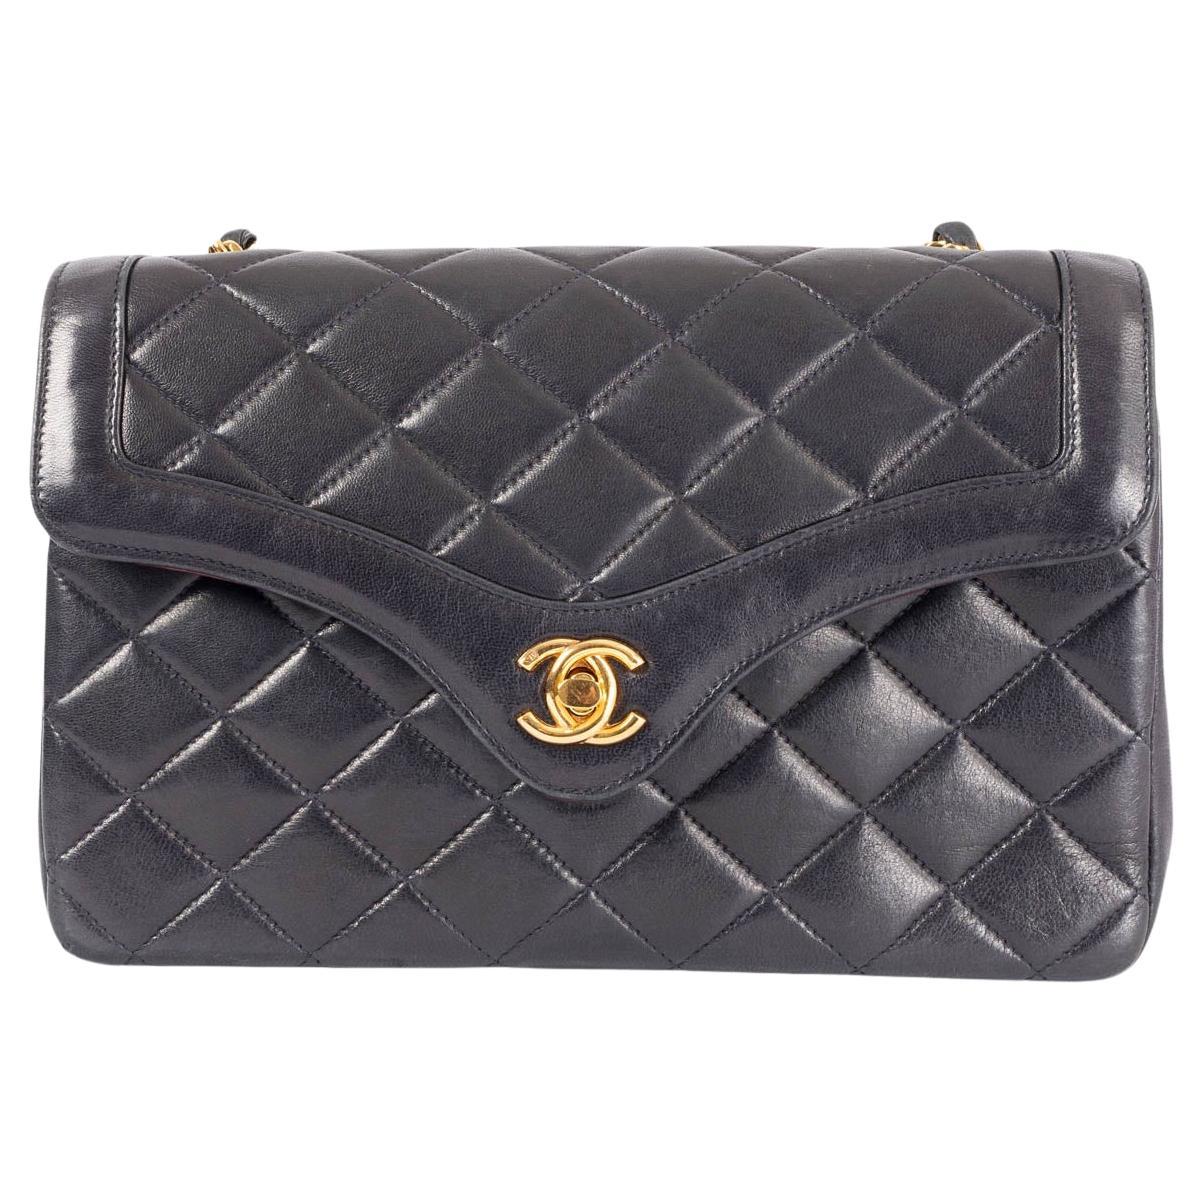 CHANEL midnight blue leather 1994 - 96 QUILTED FLAP Shoulder Bag